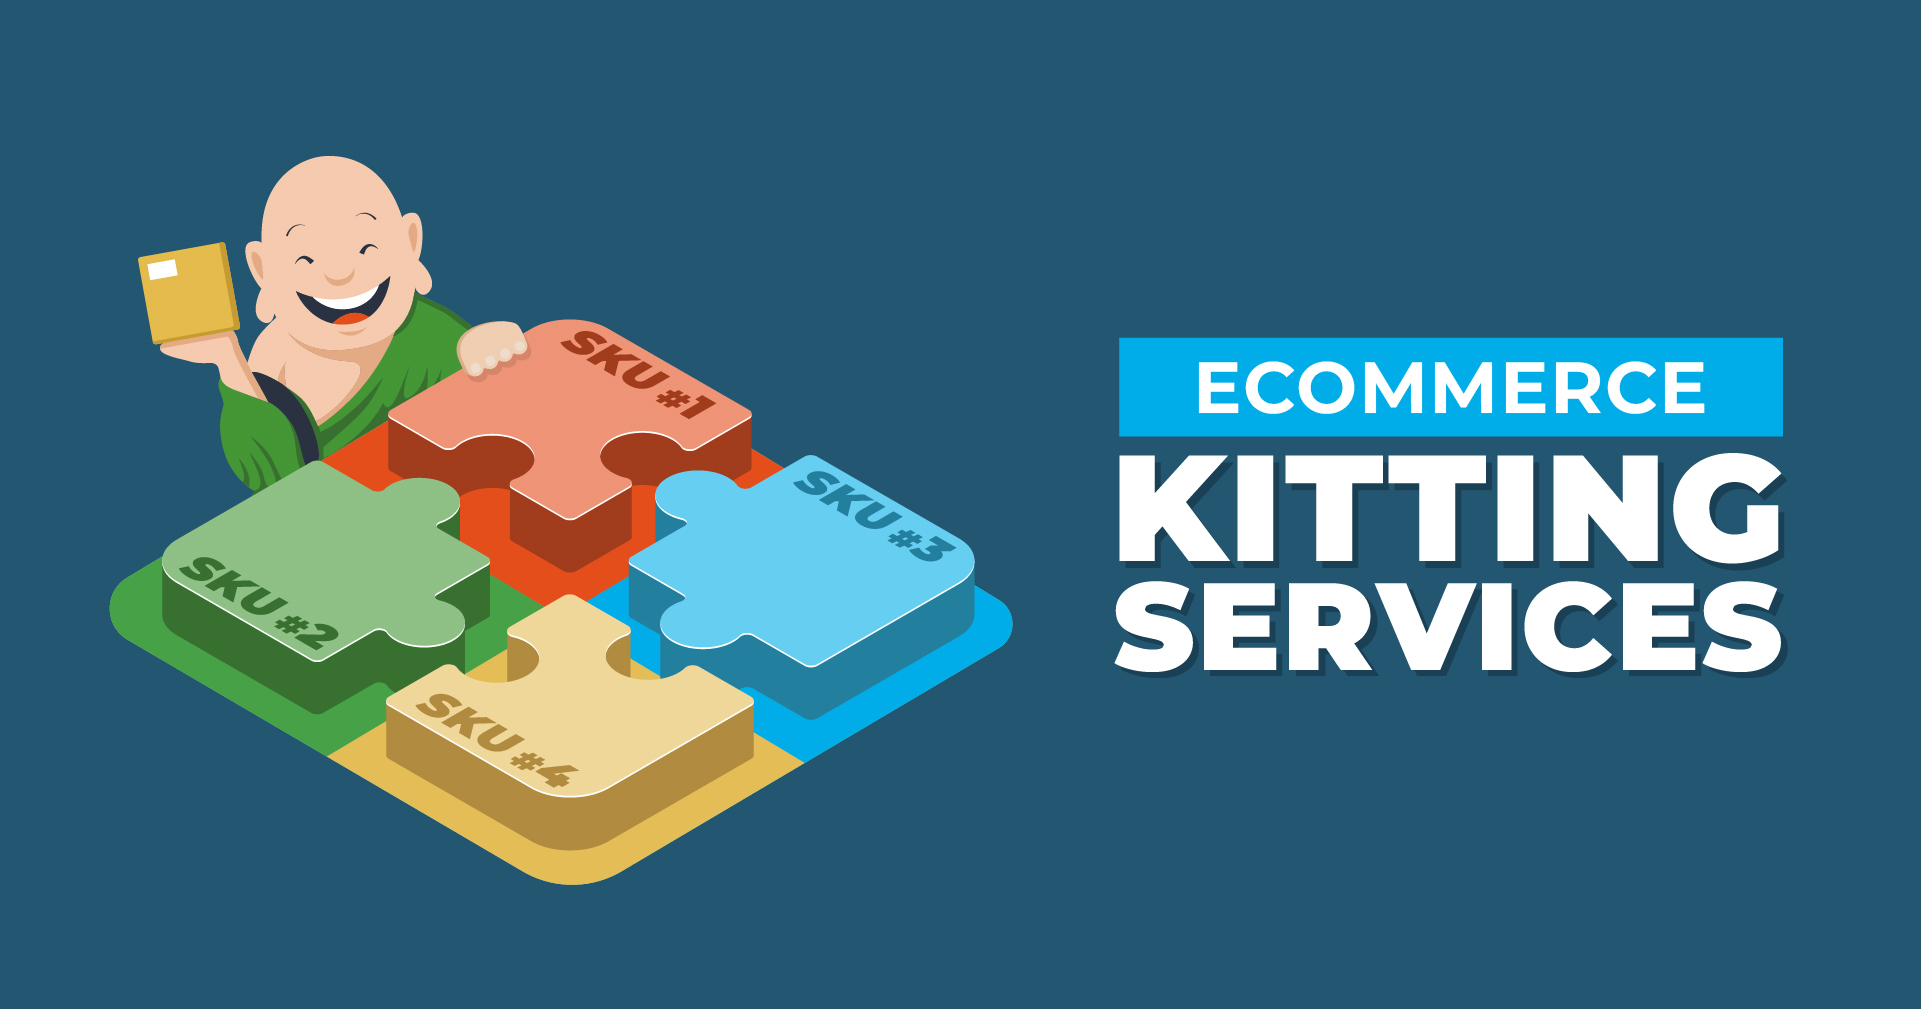 Ecommerce Kitting Services